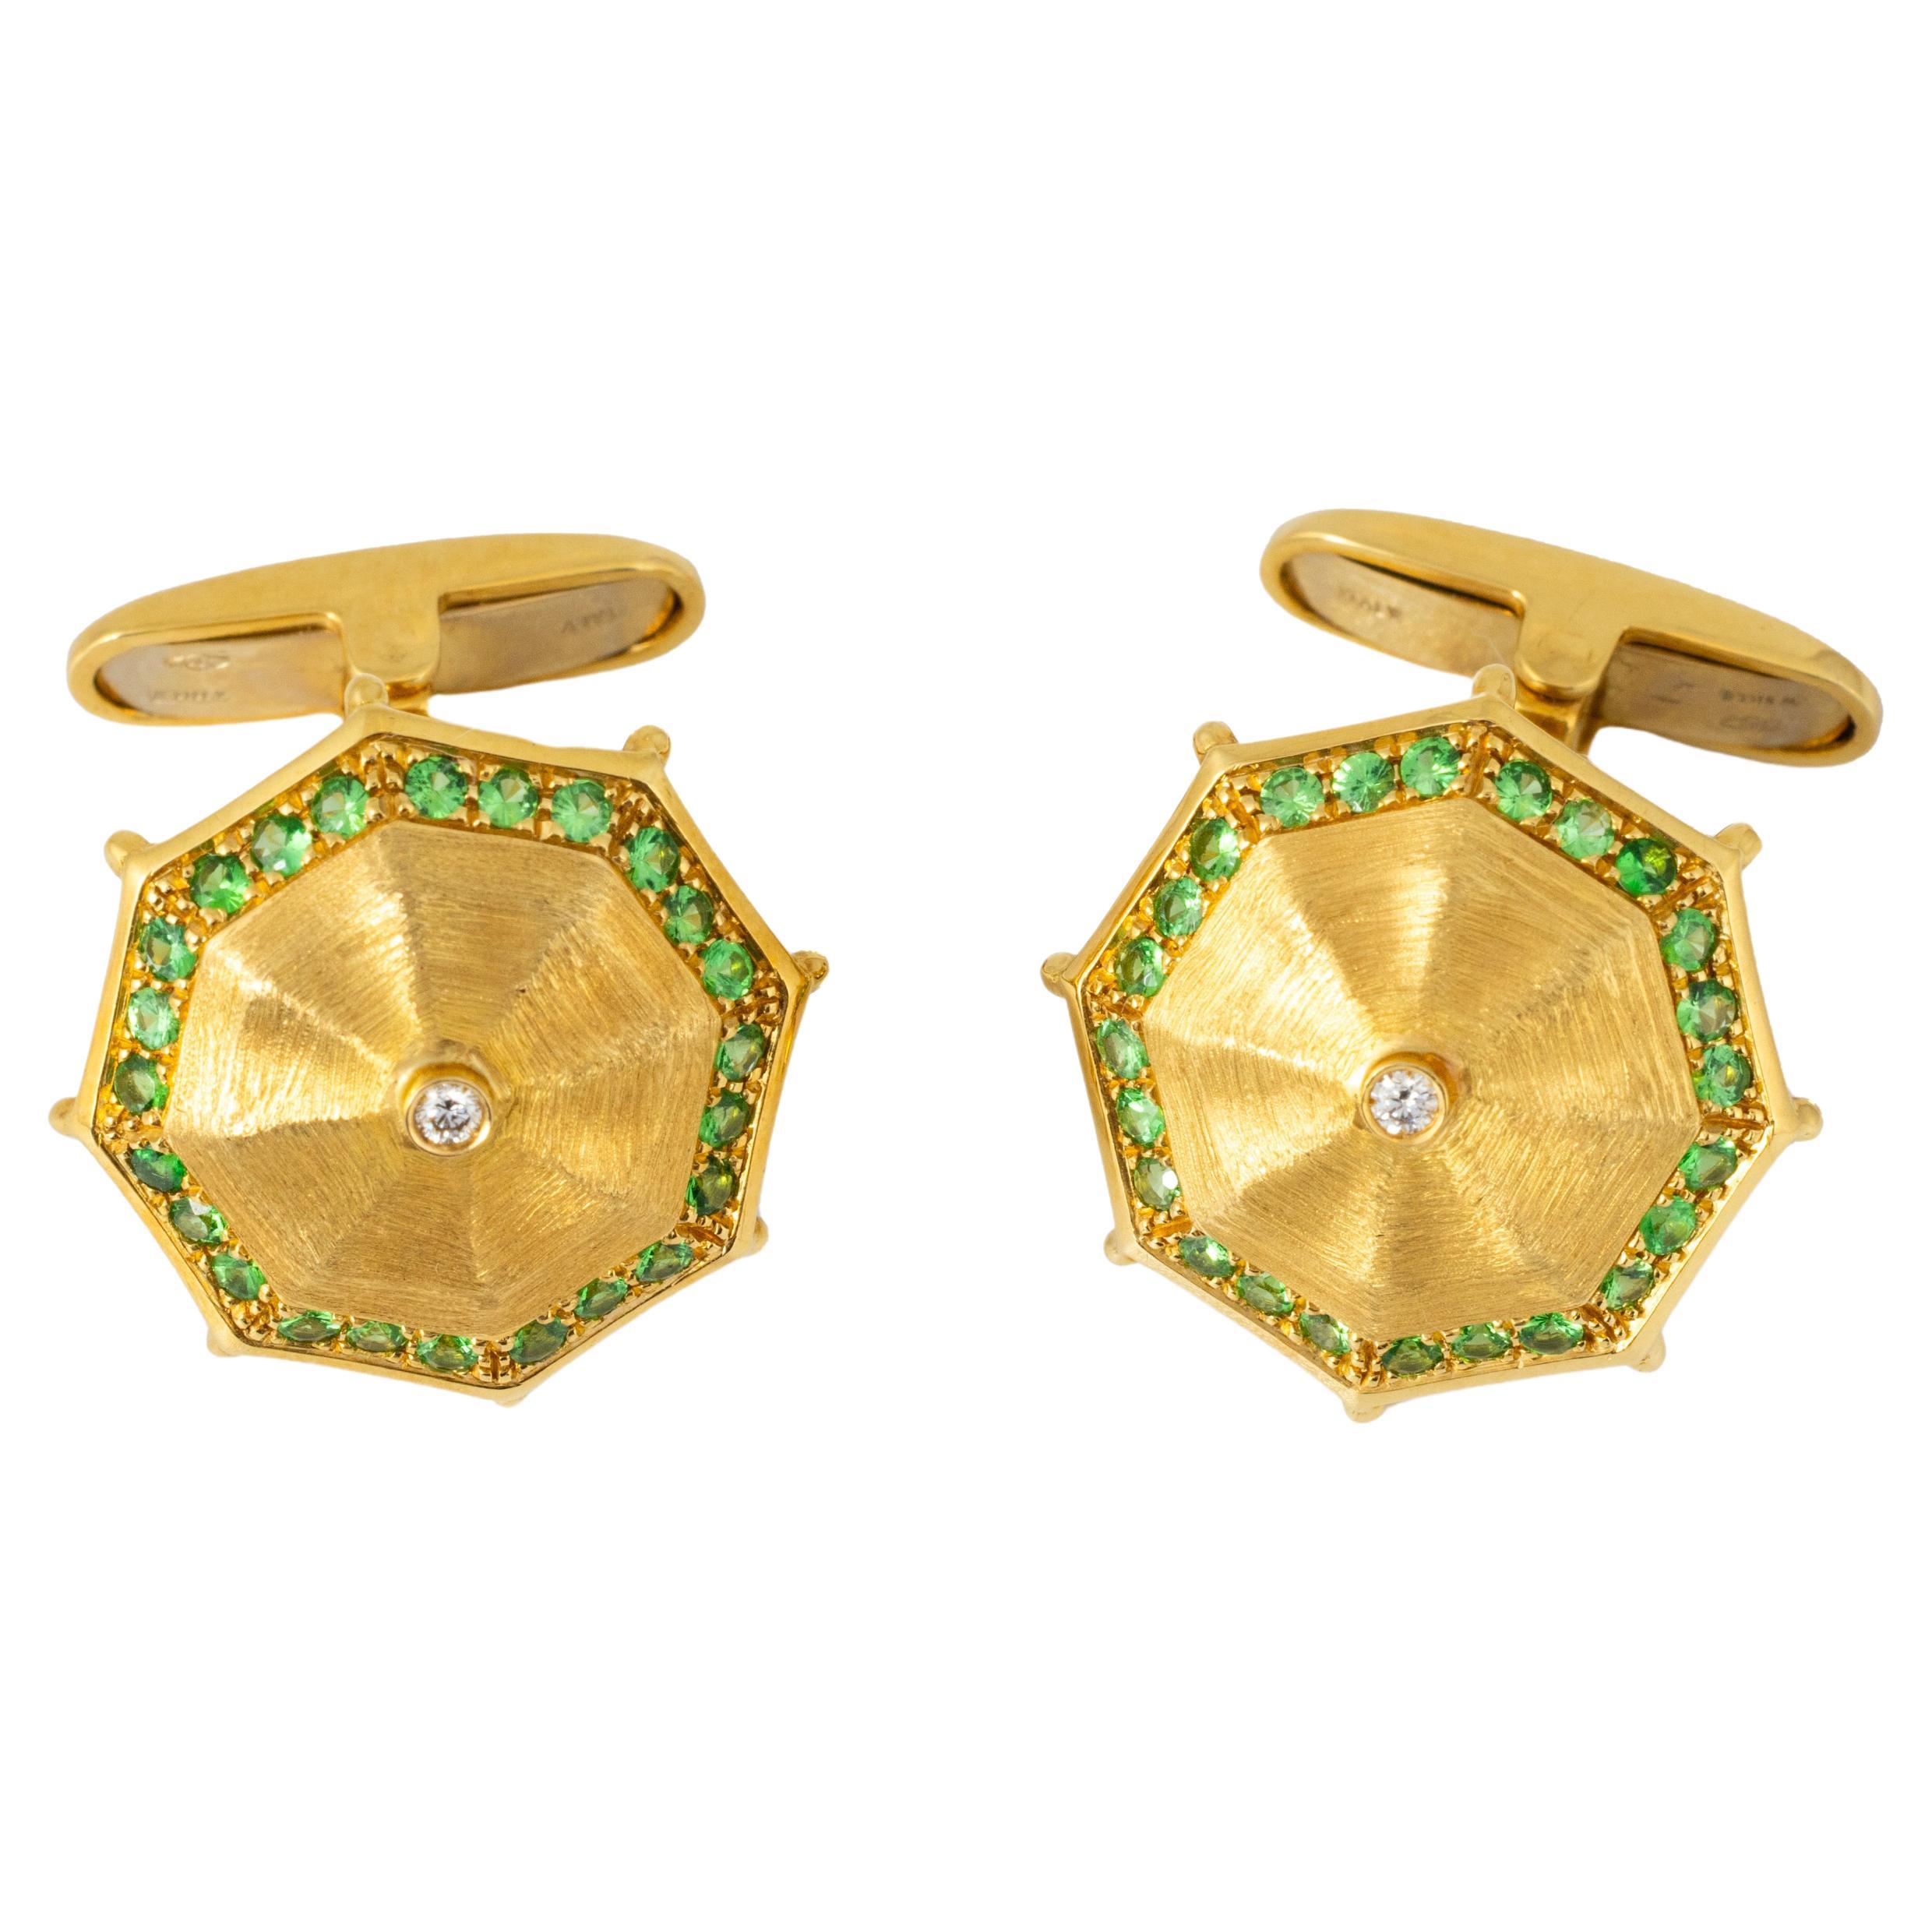 "Costis" Umbrella Collection Cufflinks YG with 0.76 carats Tsavorites on the rim For Sale